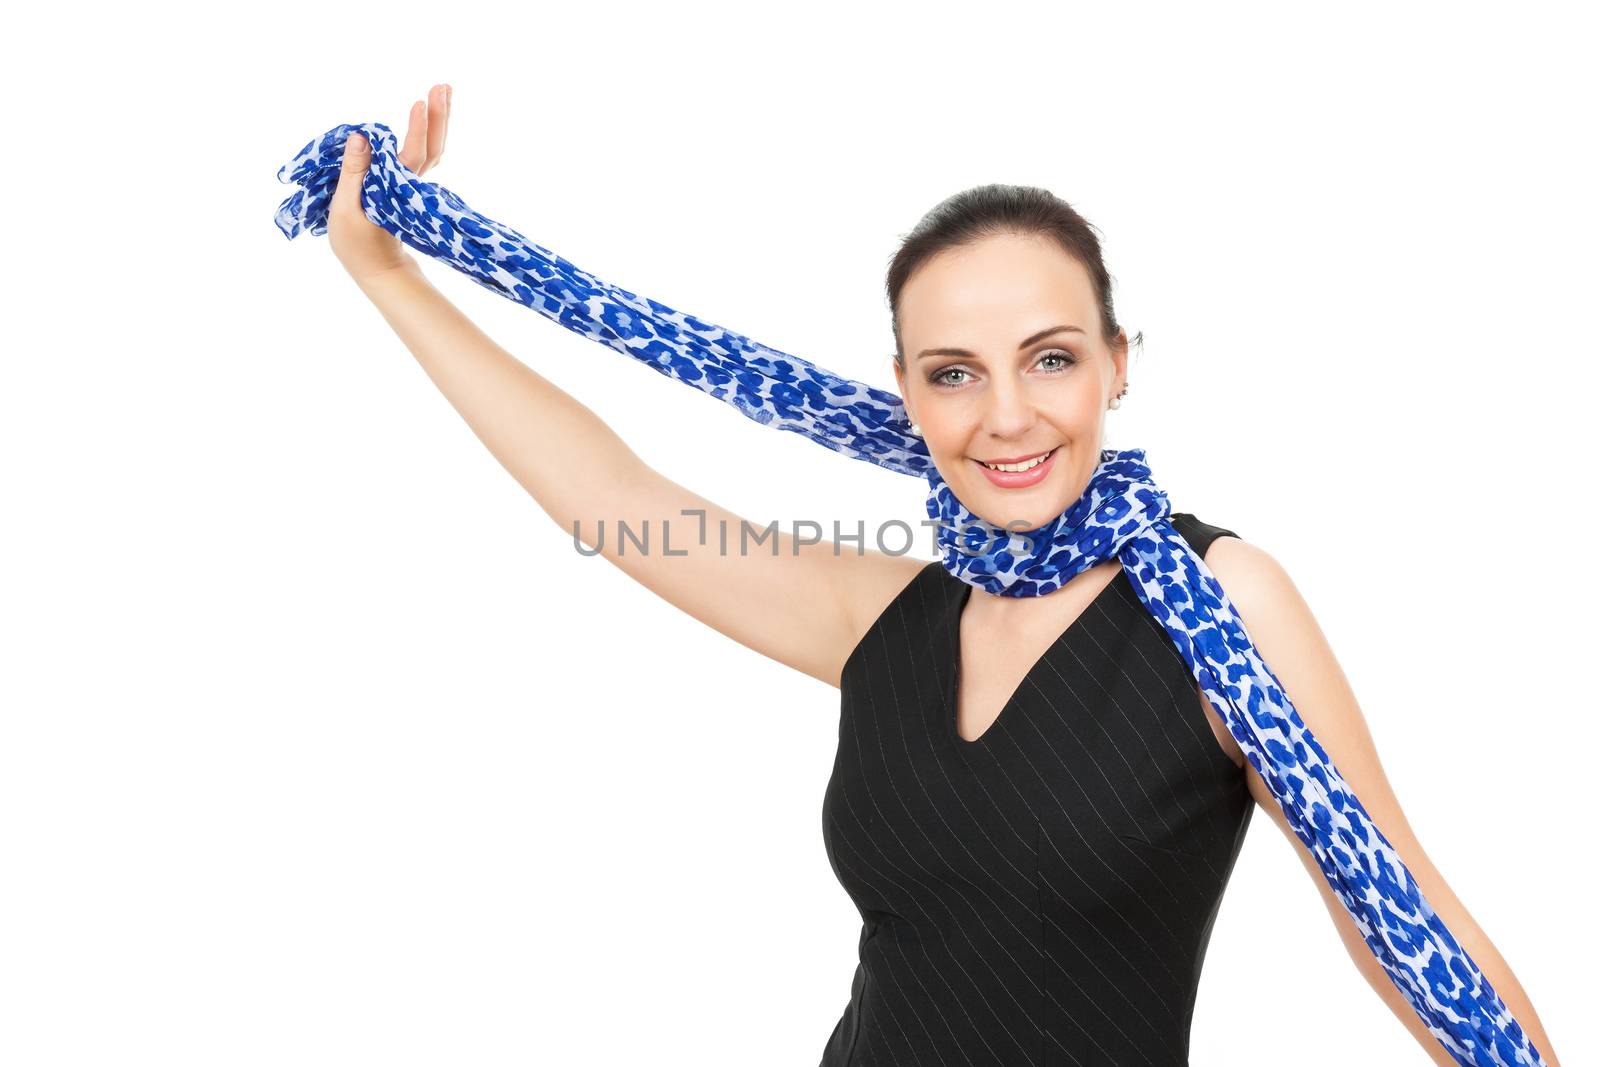 An image of a woman with a blue scarf